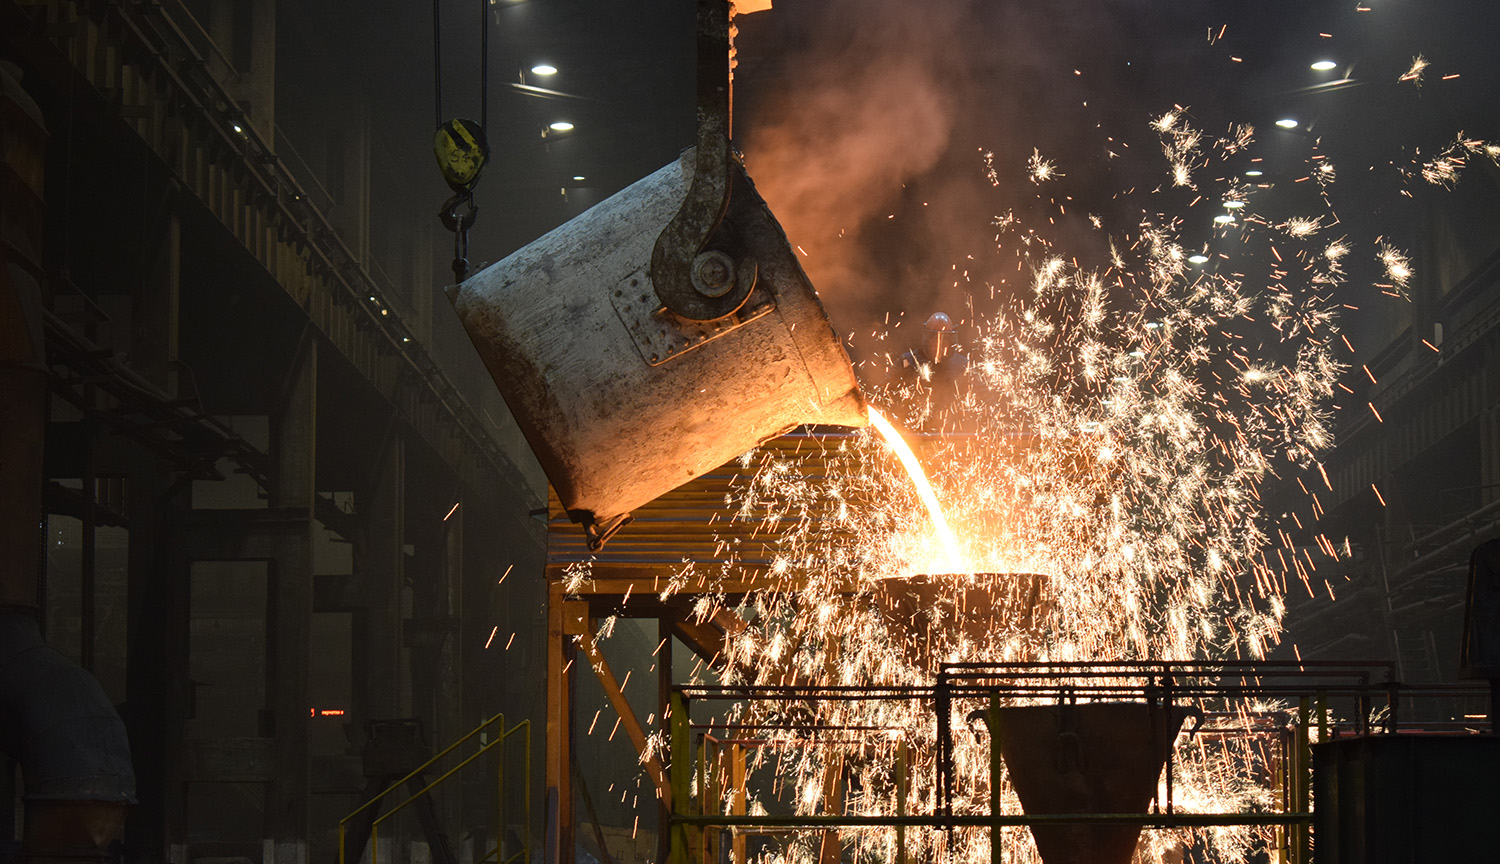 Photograph of molten metal being poured from a bucket in a metal workshop